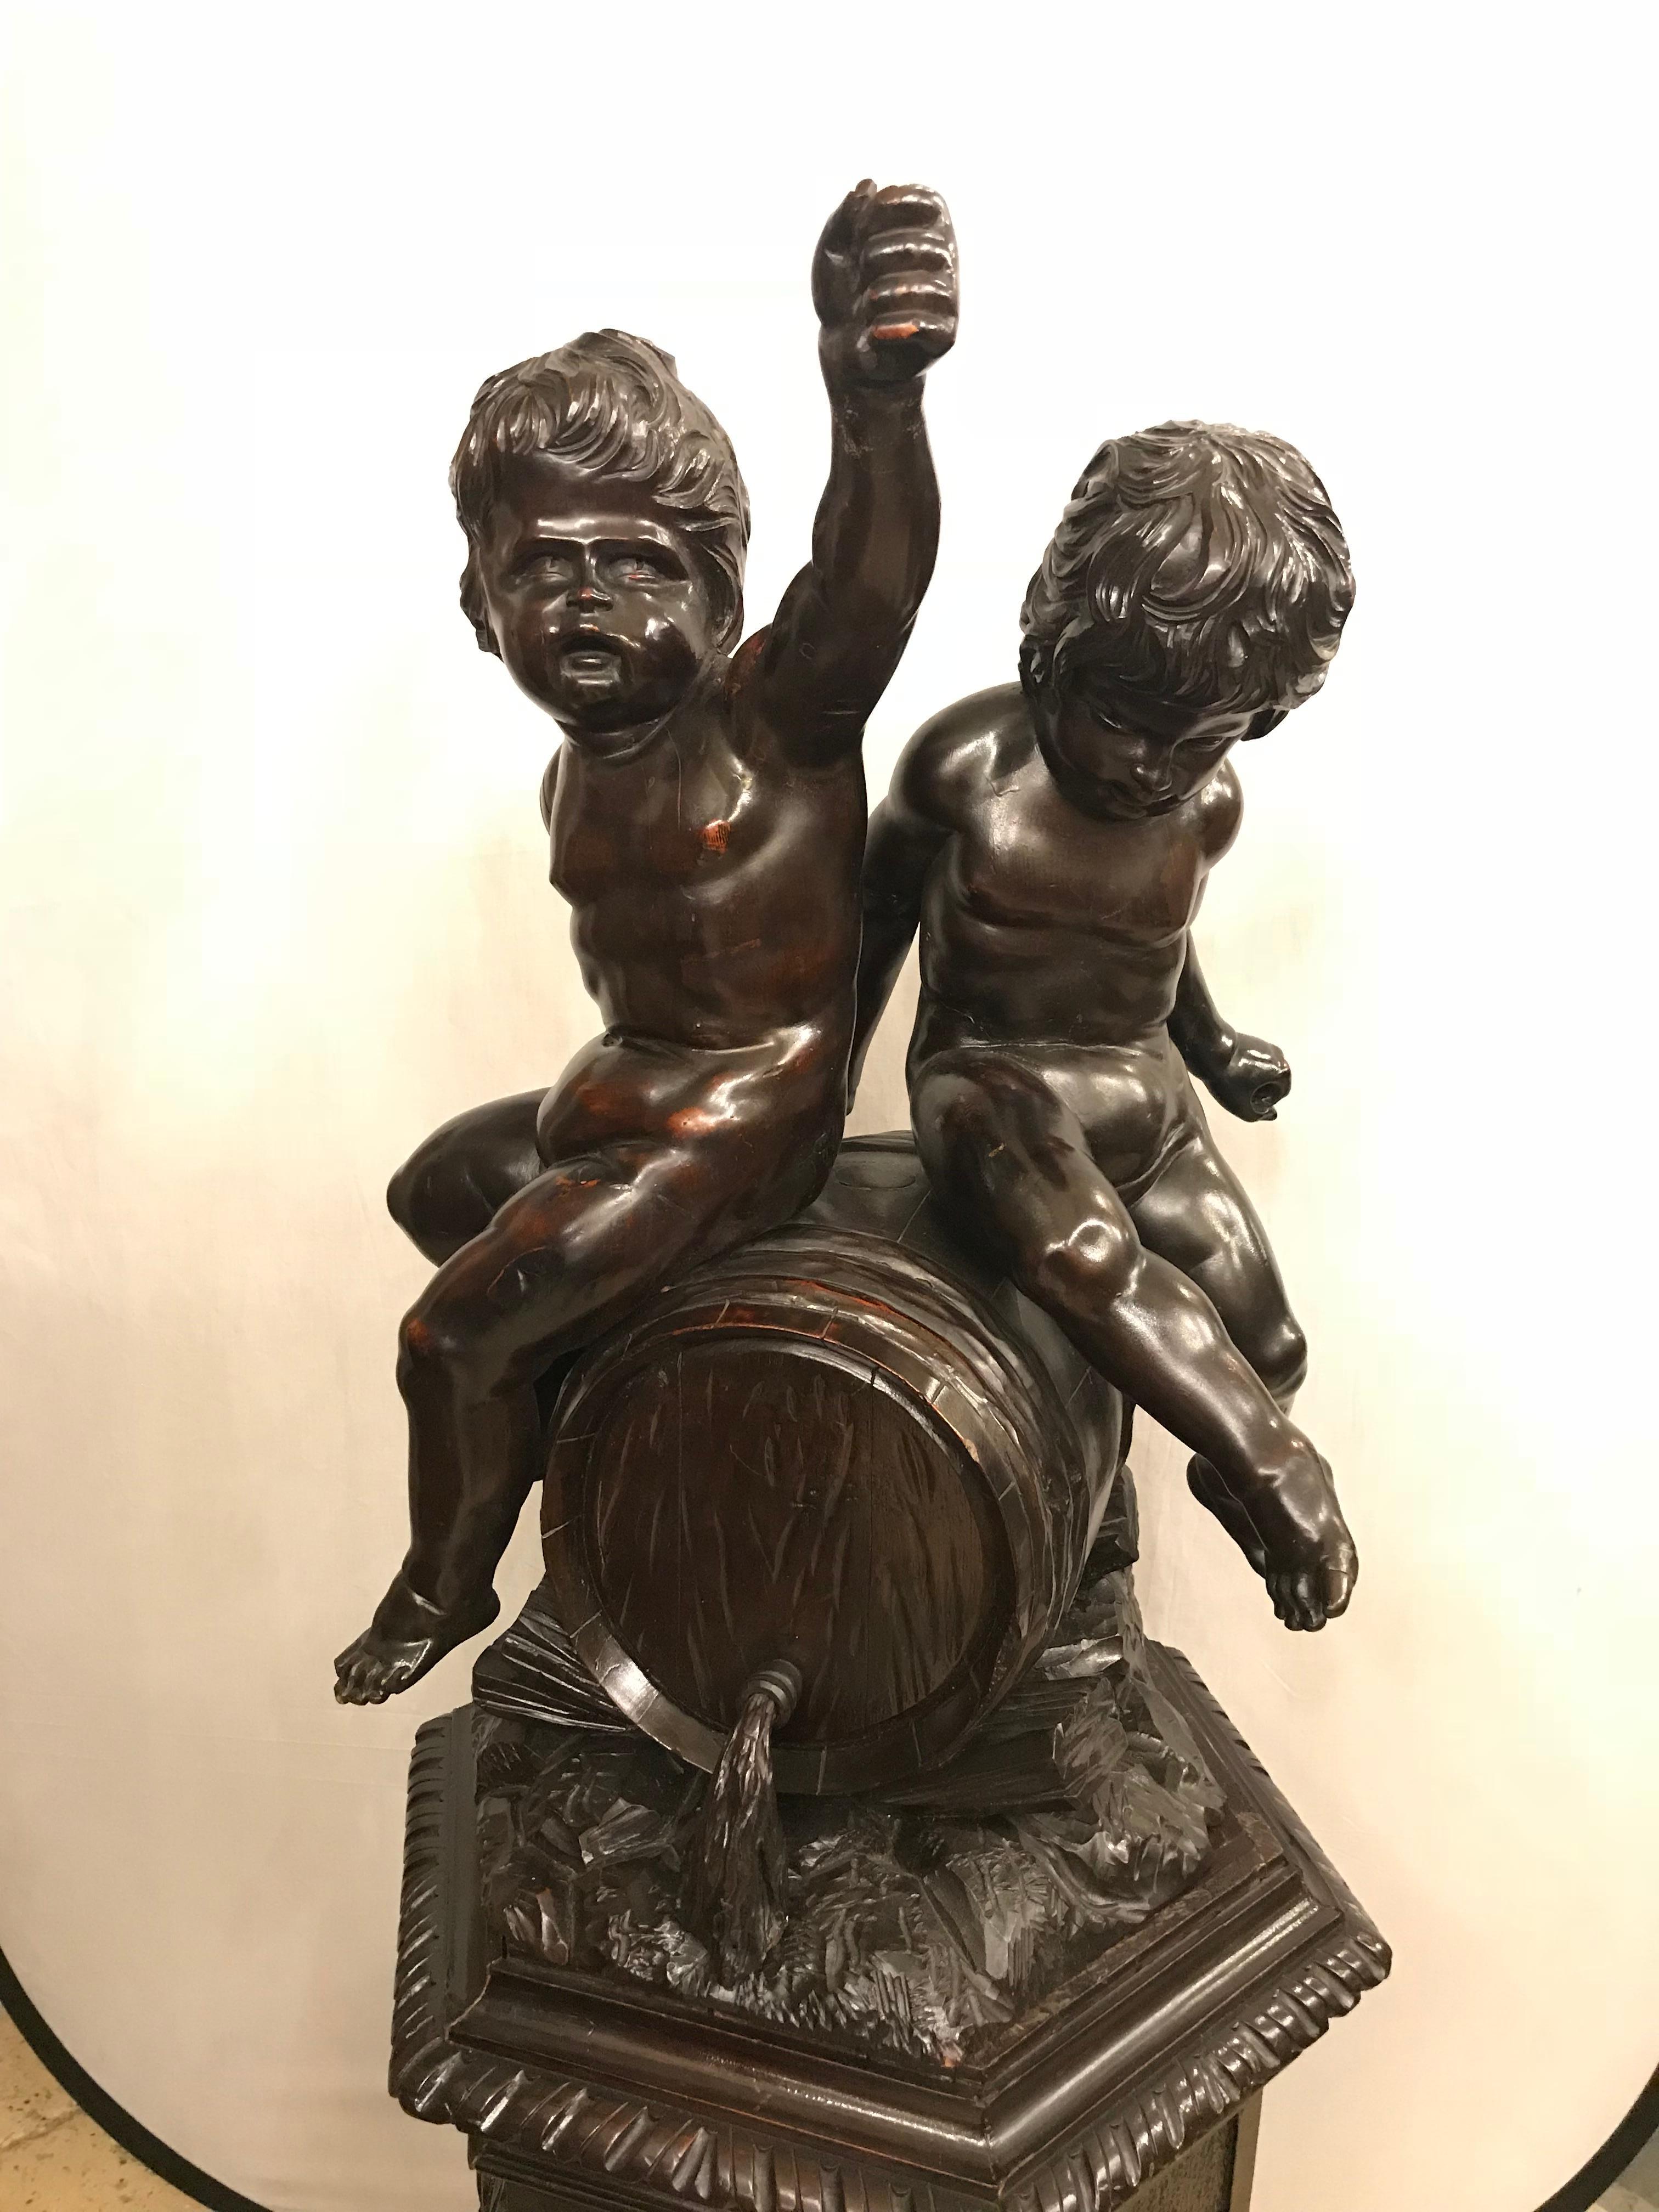 A spectacular large and very impressive one of a kind 19th century Black Forest carving on pedestal of two babies. A finely carved pedestal supporting a beer barrel having two drunken naked cherubs celebrating. Simply the finest of carvings.

PXAX